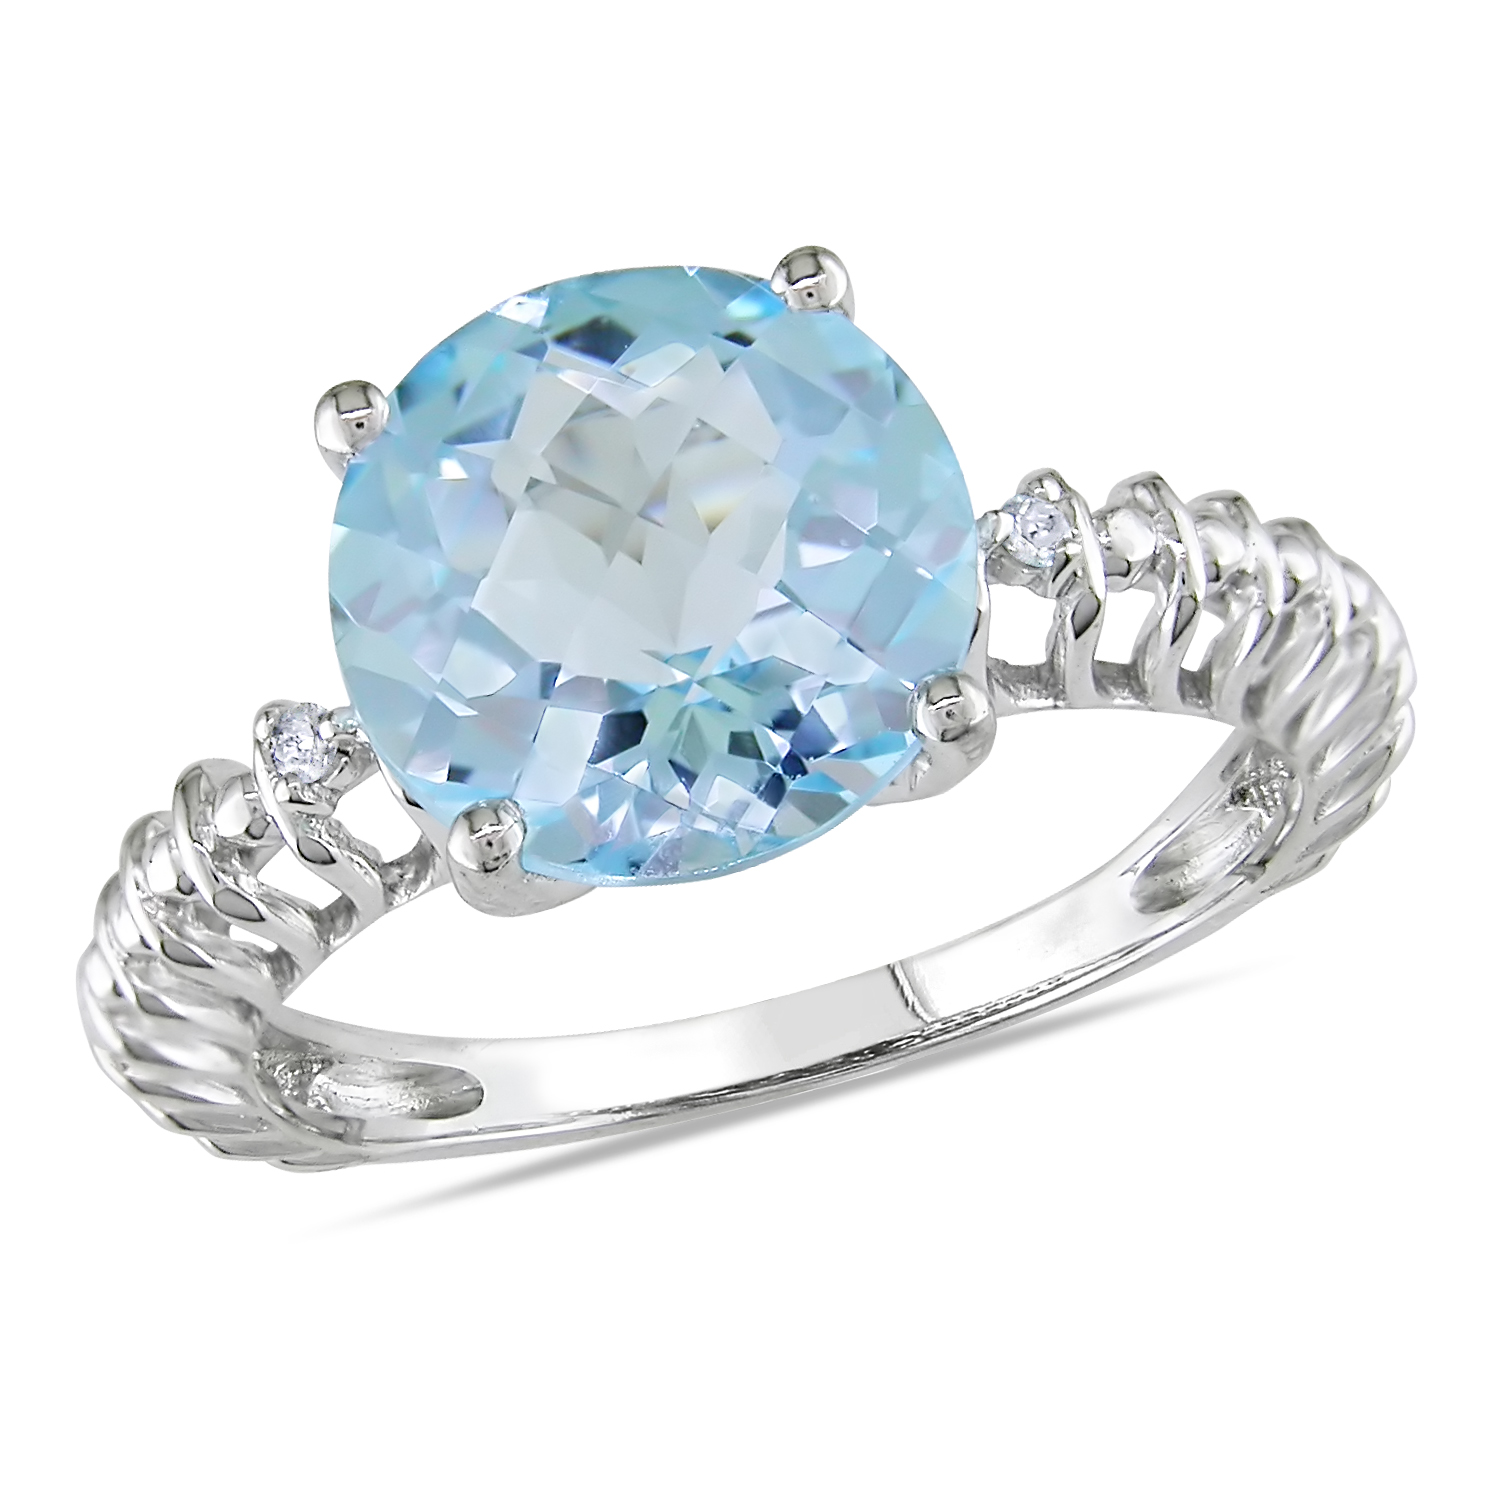 Amour 0.02 Carat T.W. Diamond and 4 1/4 Carat T.G.W. Blue Topaz Fashion Ring in Sterling Silver GH I3